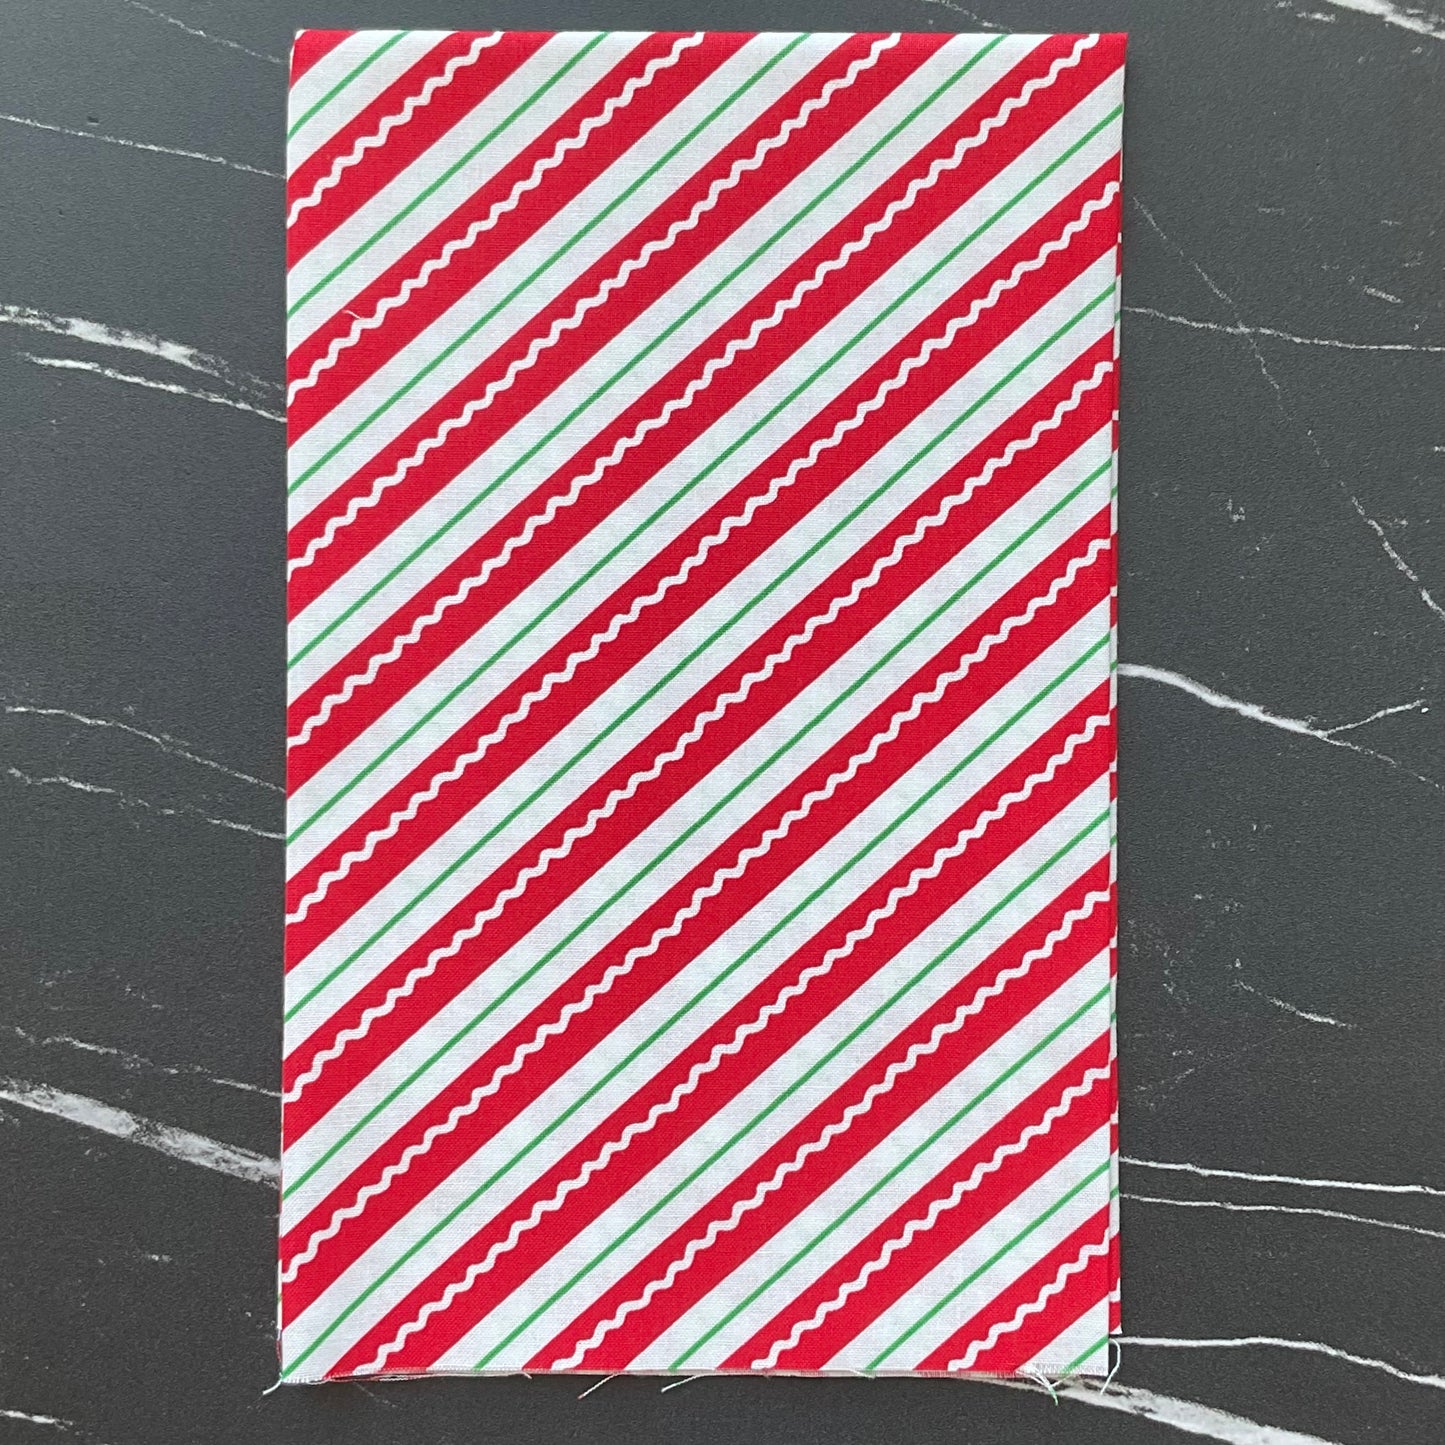 Reindeer Games by Me and My Sister Designs - Candy Cane Stripe - Poinsettia Red